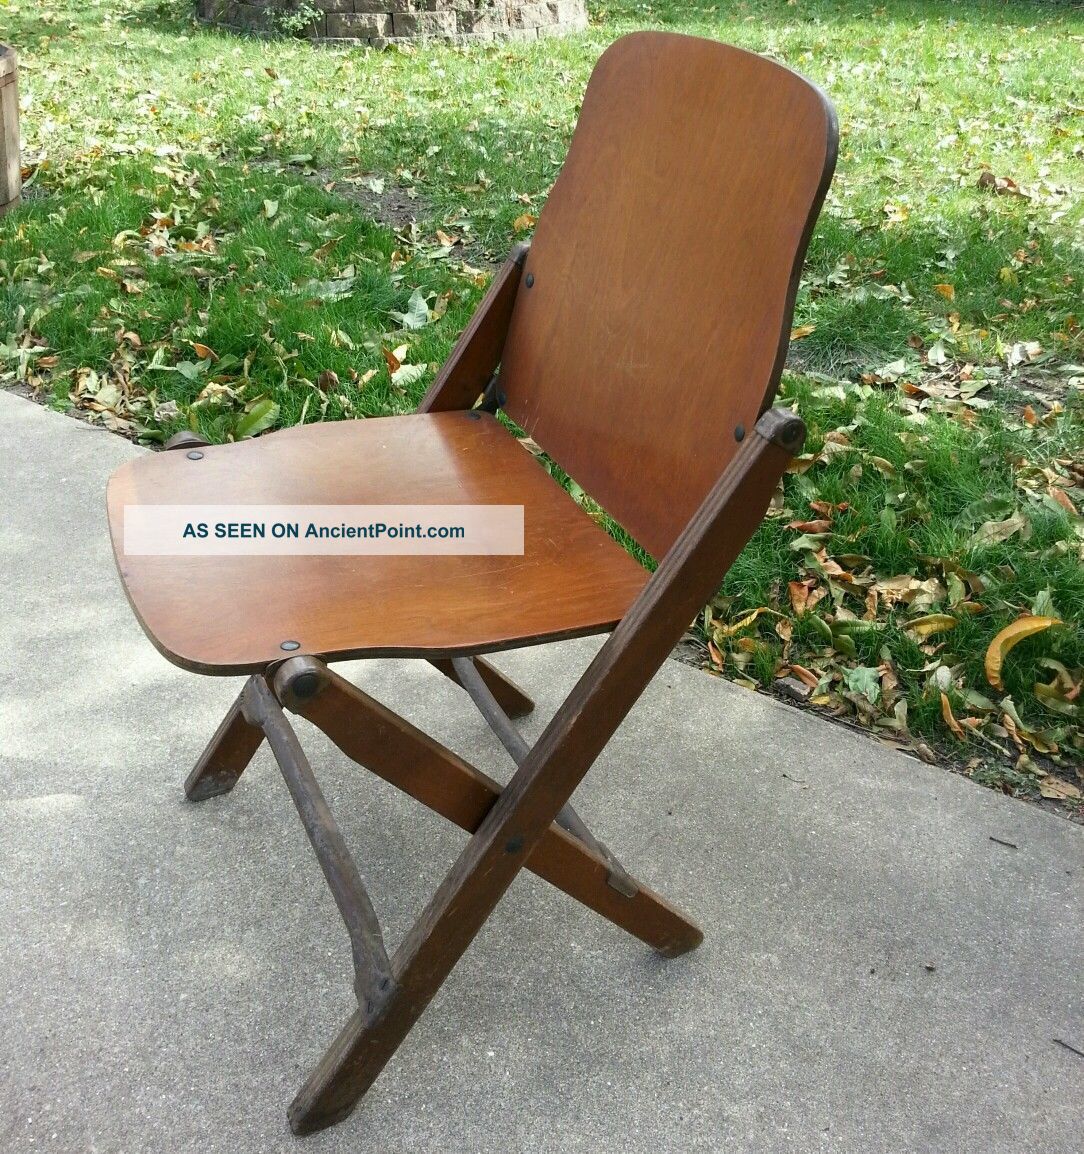 Antique Vintage American Seating Company Wood Folding Chair Very Rare Piece 1900-1950 photo